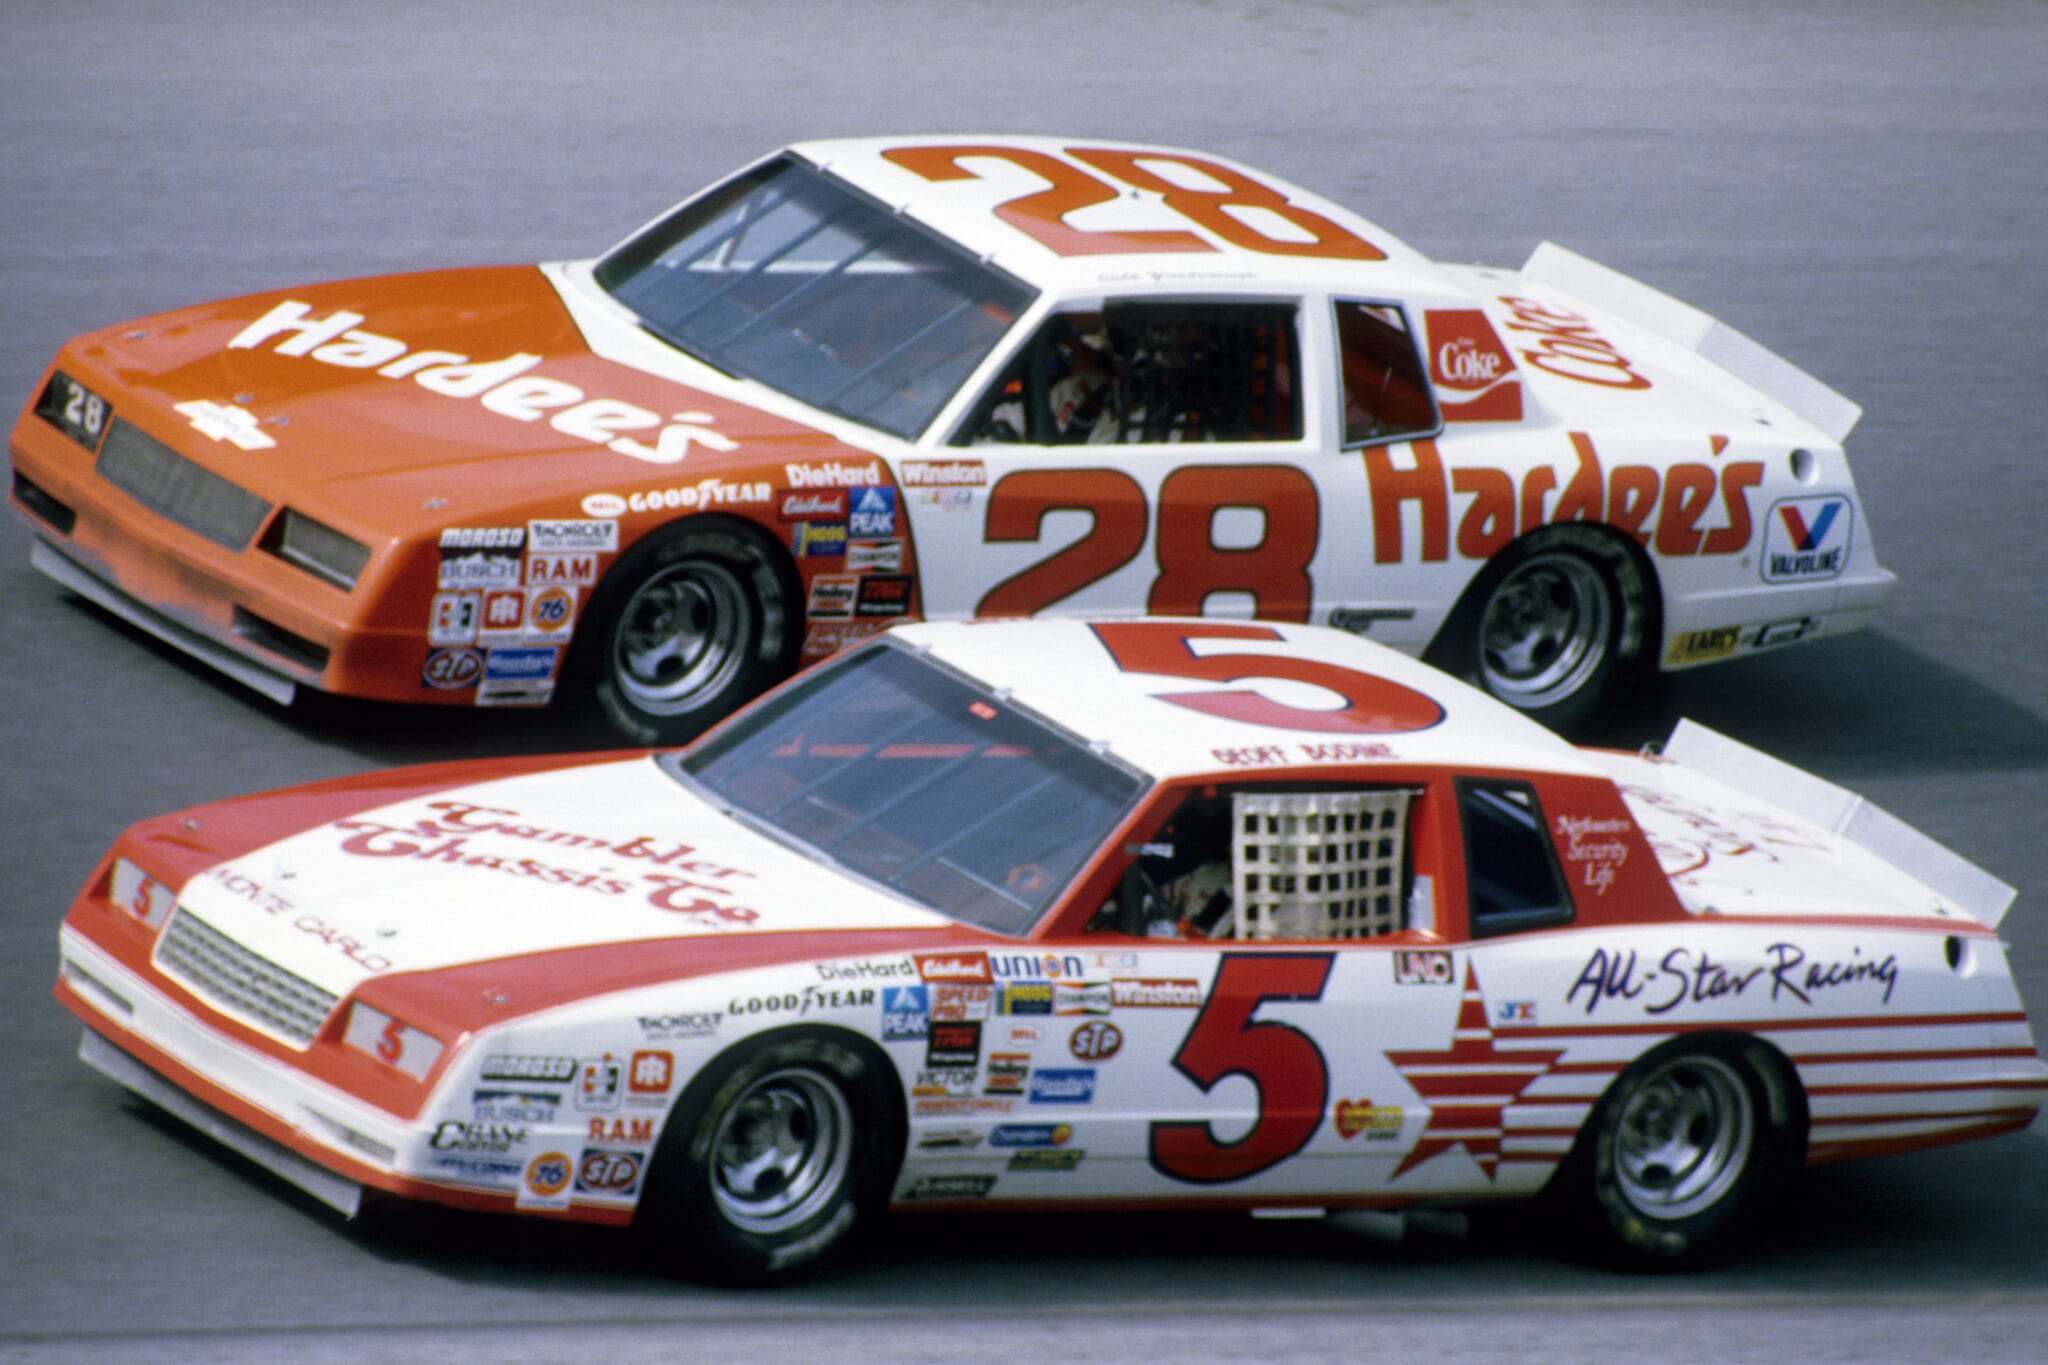 The best NASCAR races ever From the Daytona 500 to Talladega 500